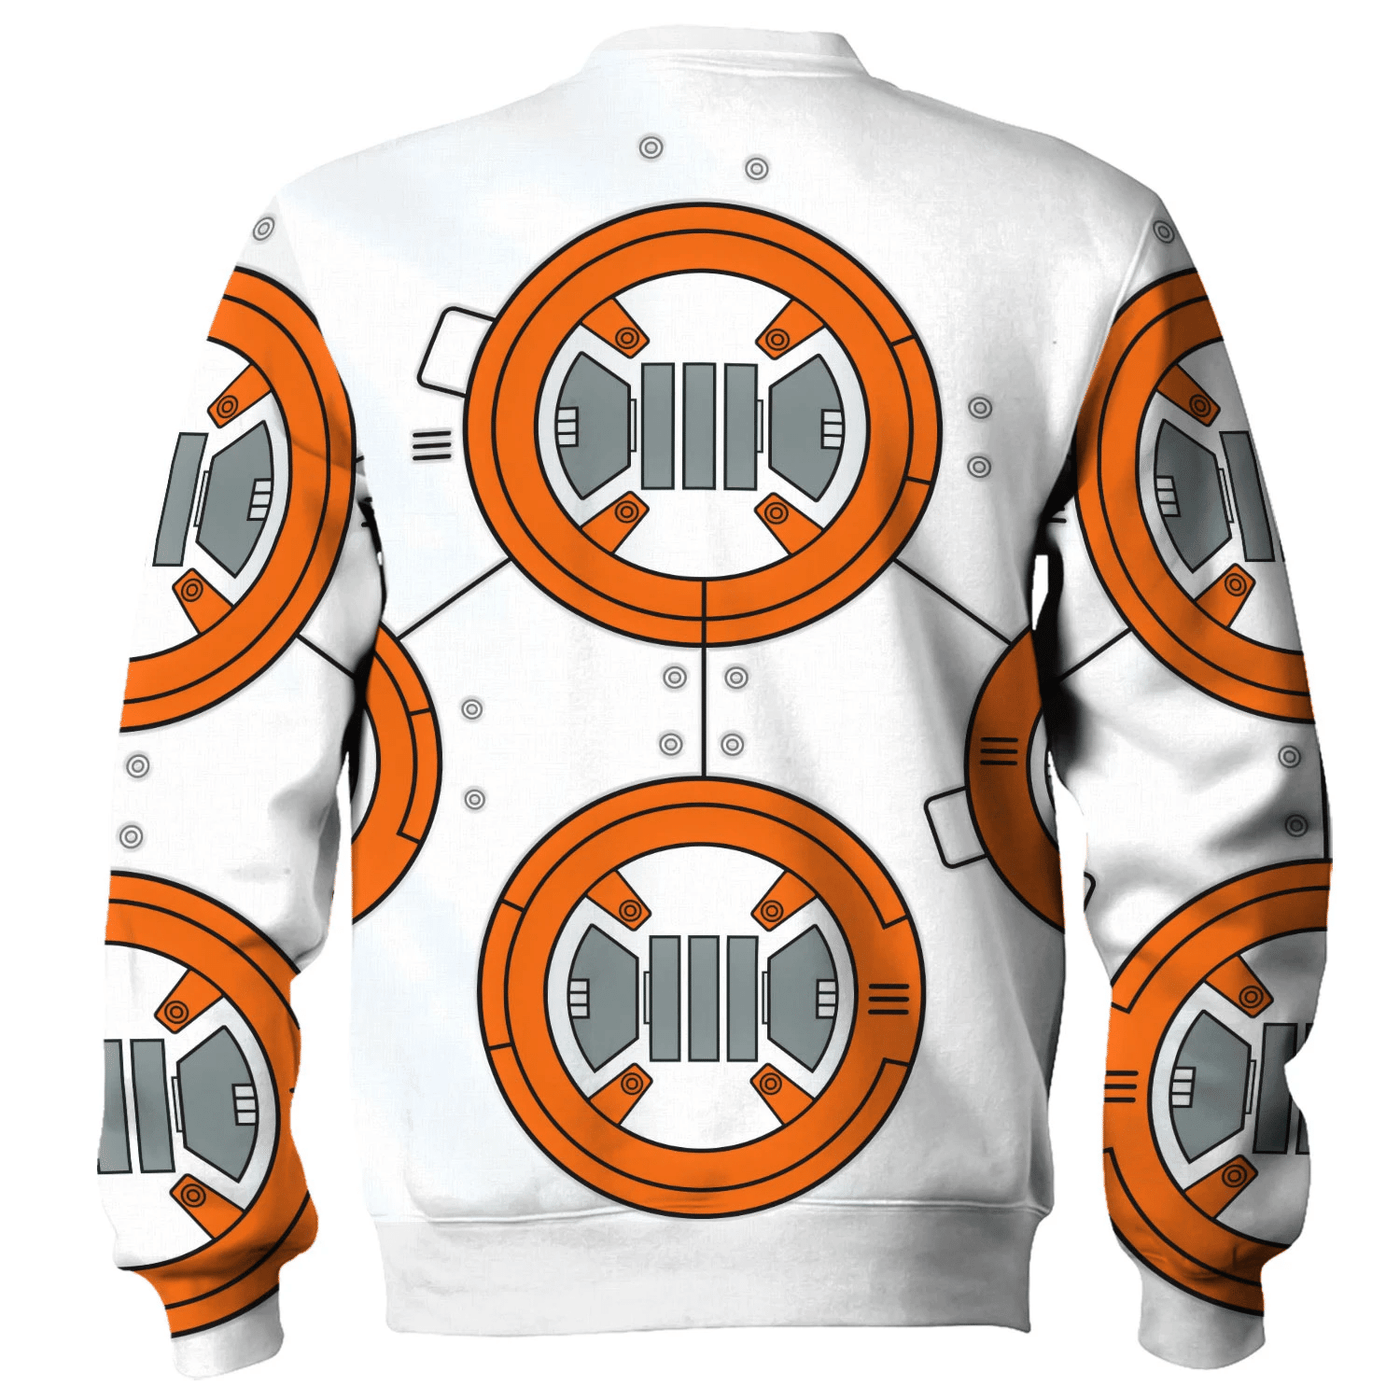 Star Wars BB 8 Robot Costume - Sweater - Ugly Christmas Sweater